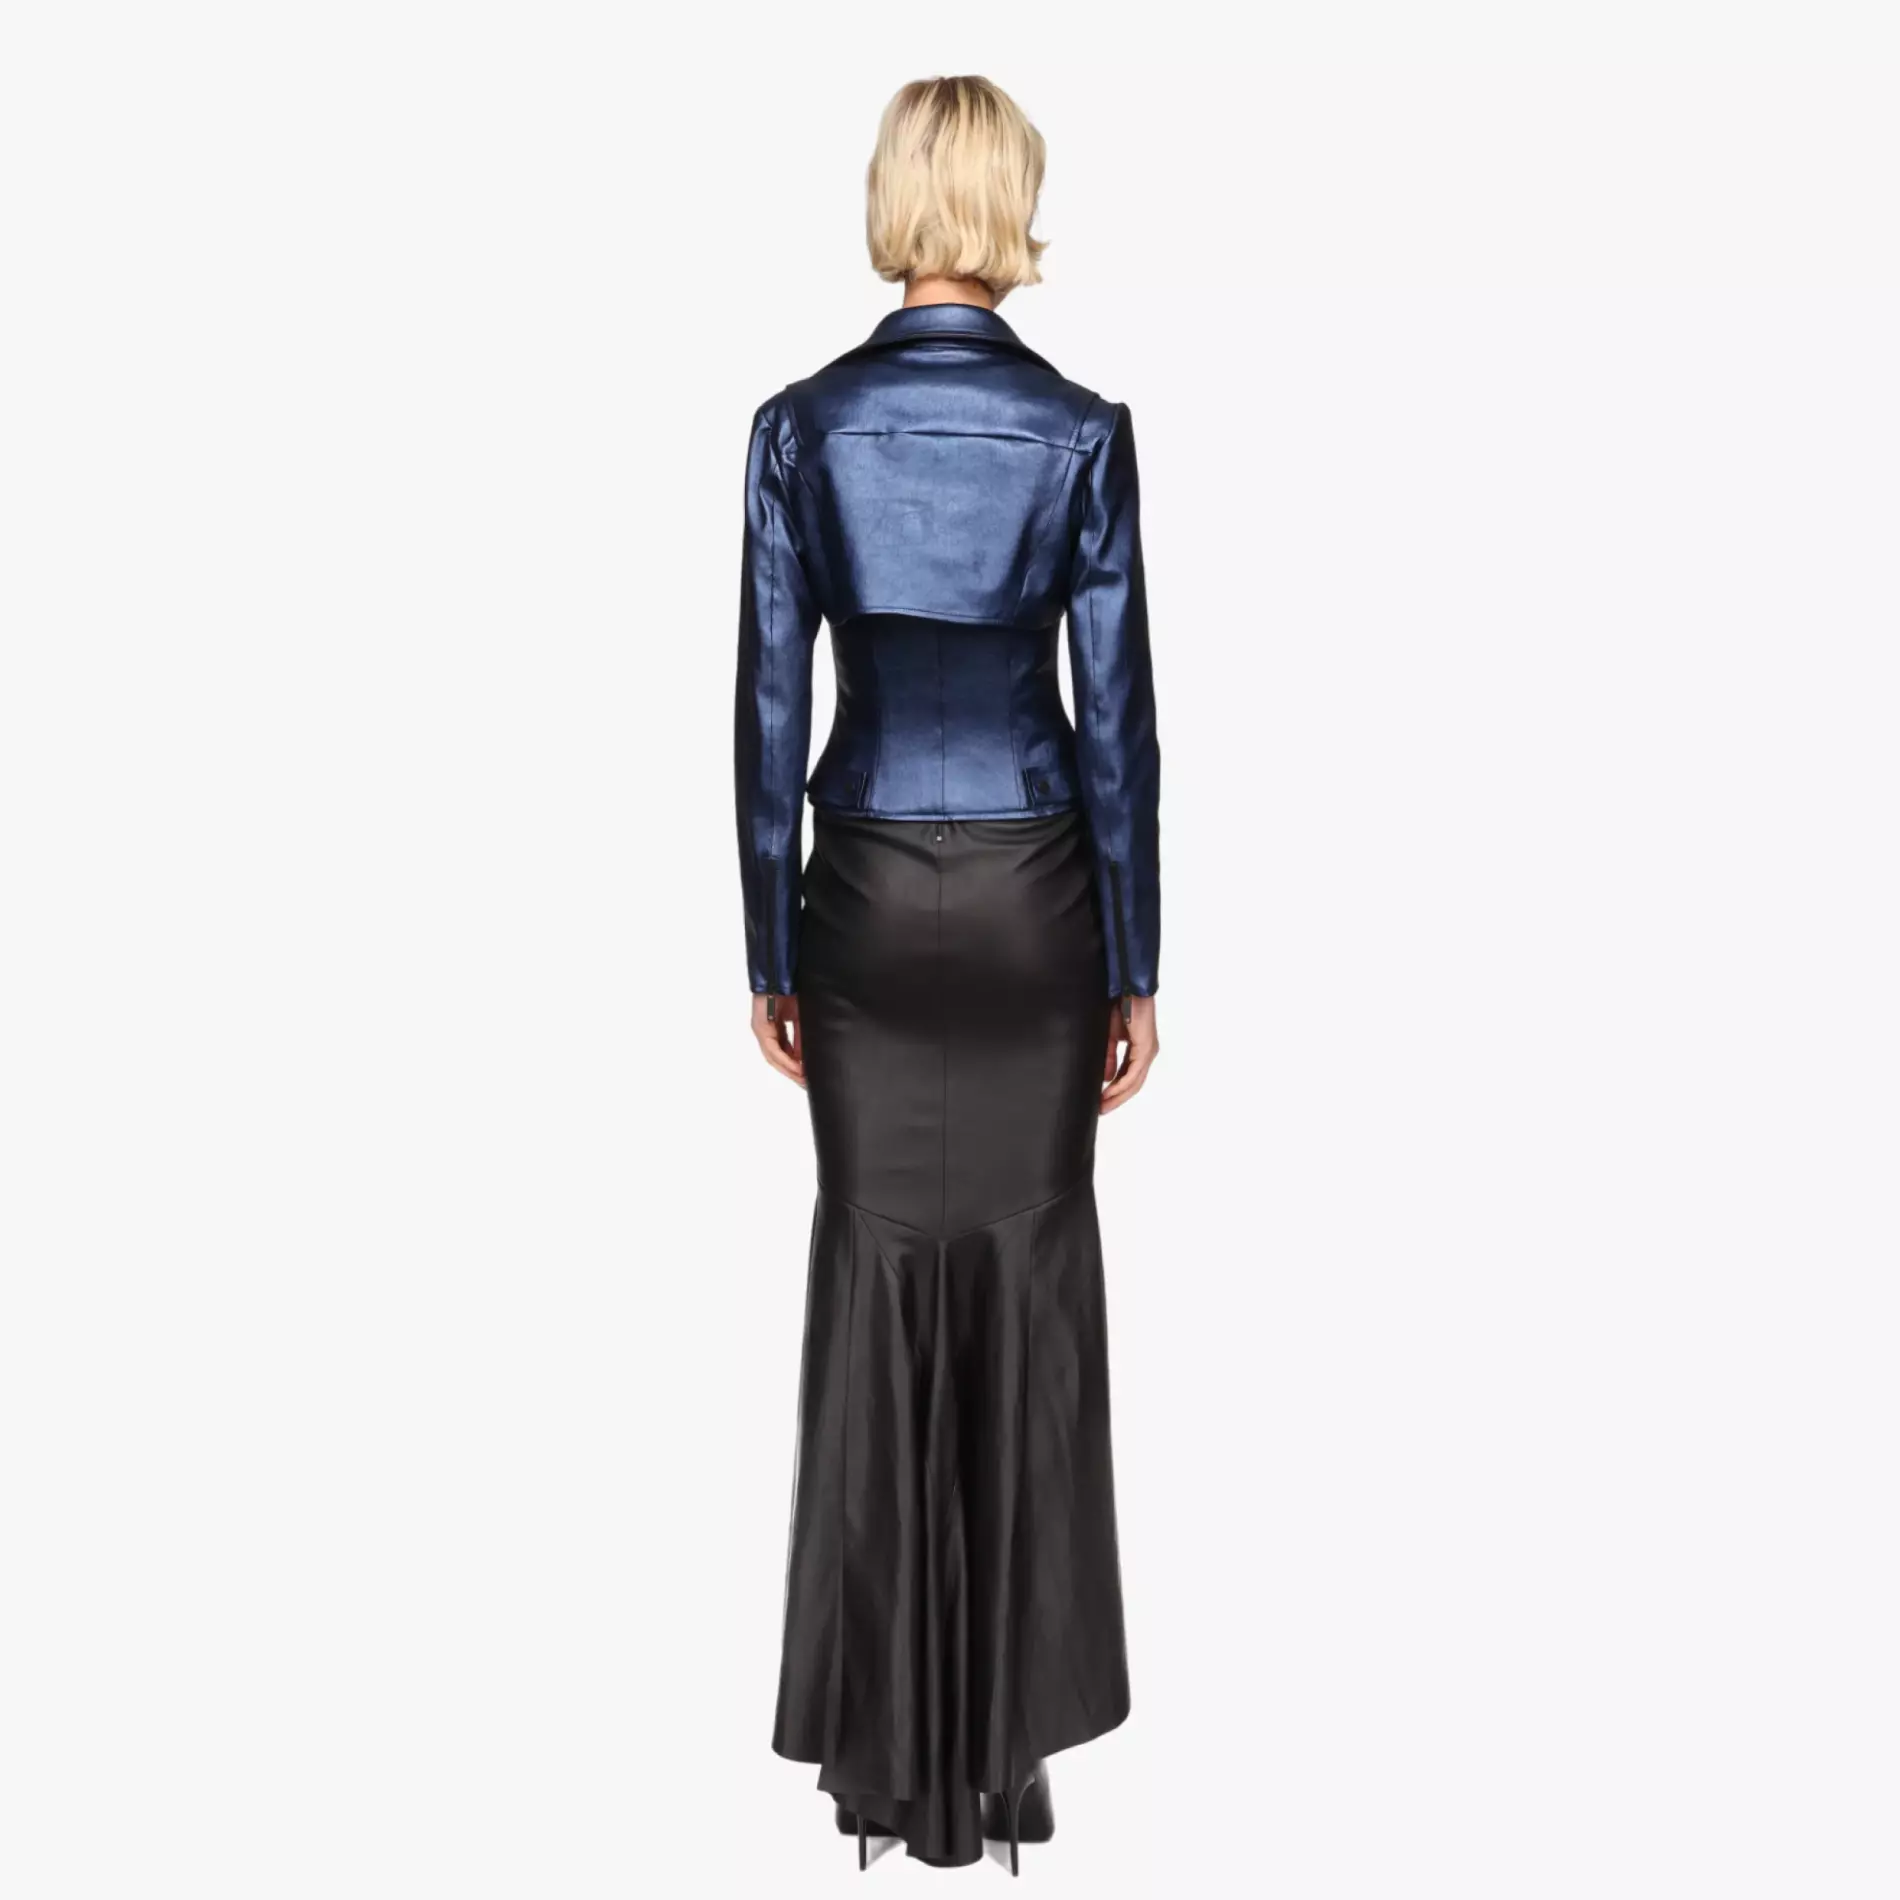 JOLIE long skirt in black stretch leather Jitrois - back view